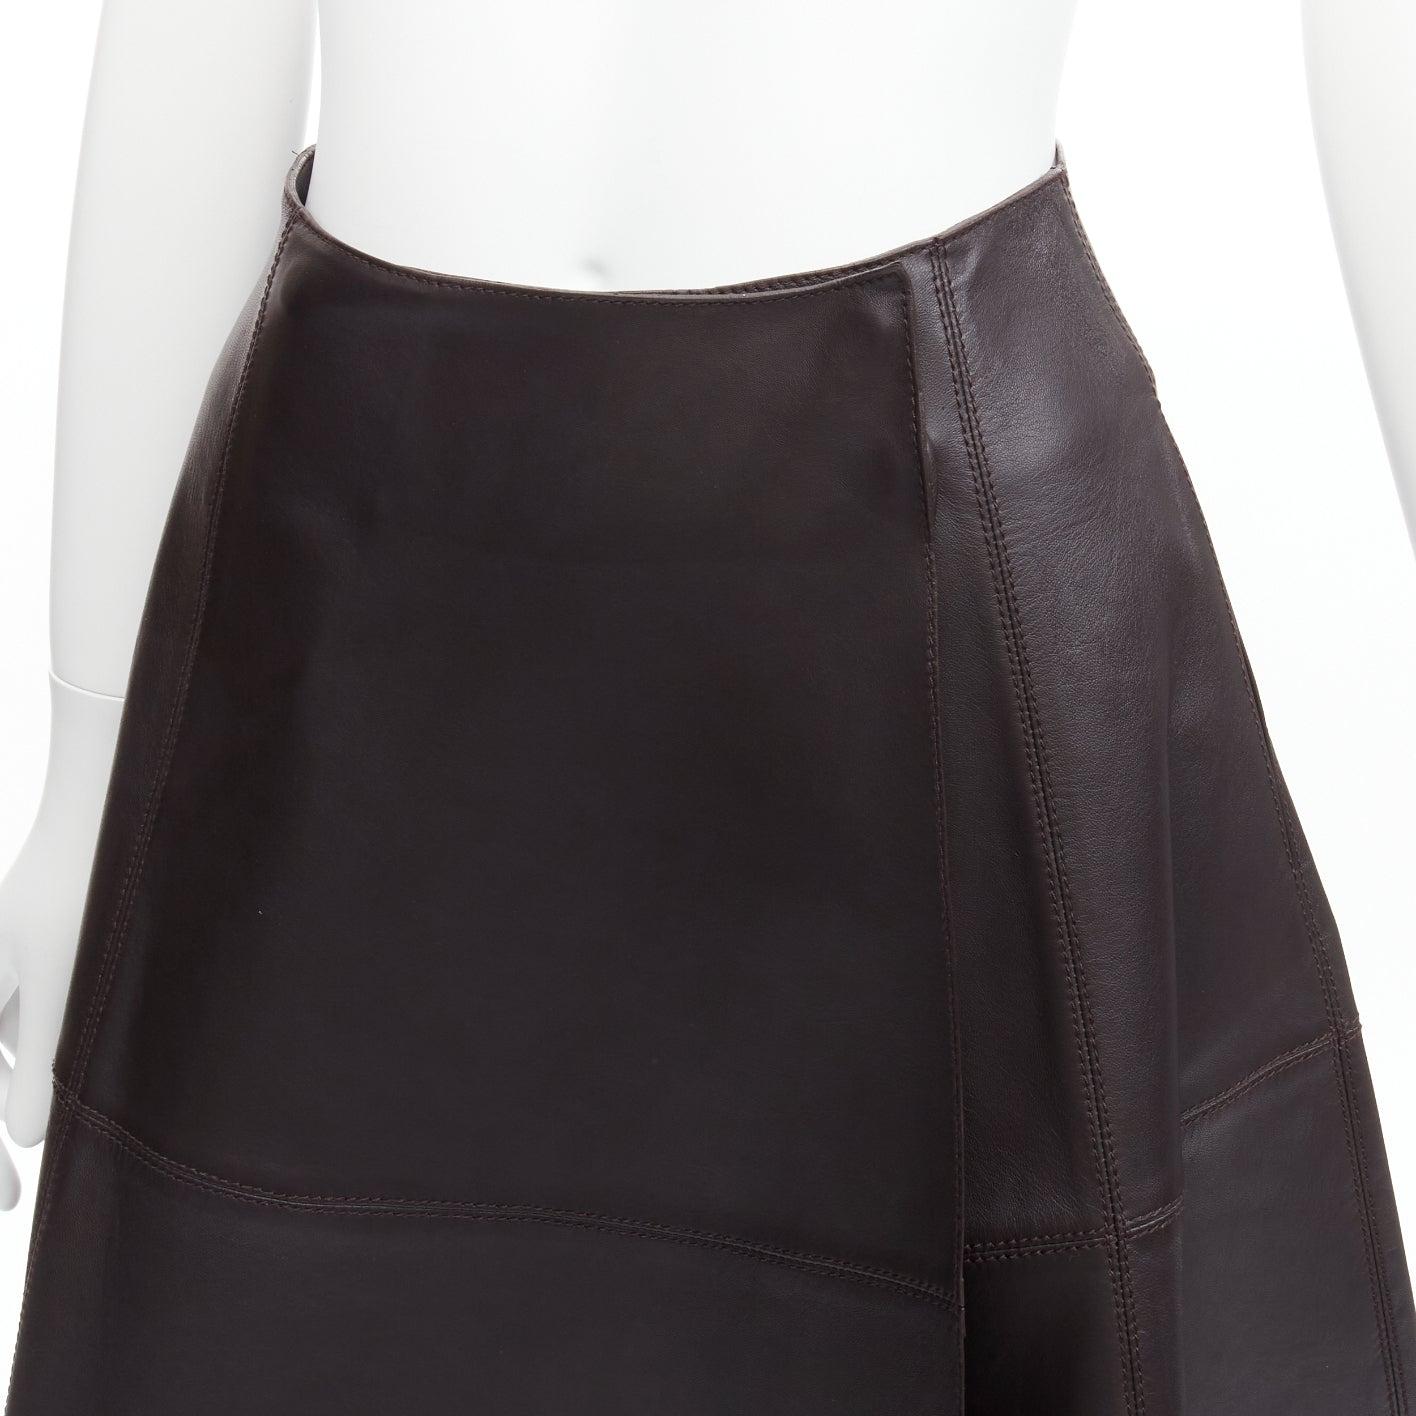 CRYSTAL WANG brown genuine lambskin leather minimal panelled A-line midi skirt FR34 XS
Reference: LNKO/A02170
Brand: Crystal Wang
Material: Leather
Color: Brown
Pattern: Solid
Closure: Snap Buttons
Lining: Brown Leather
Extra Details: Snap buttons